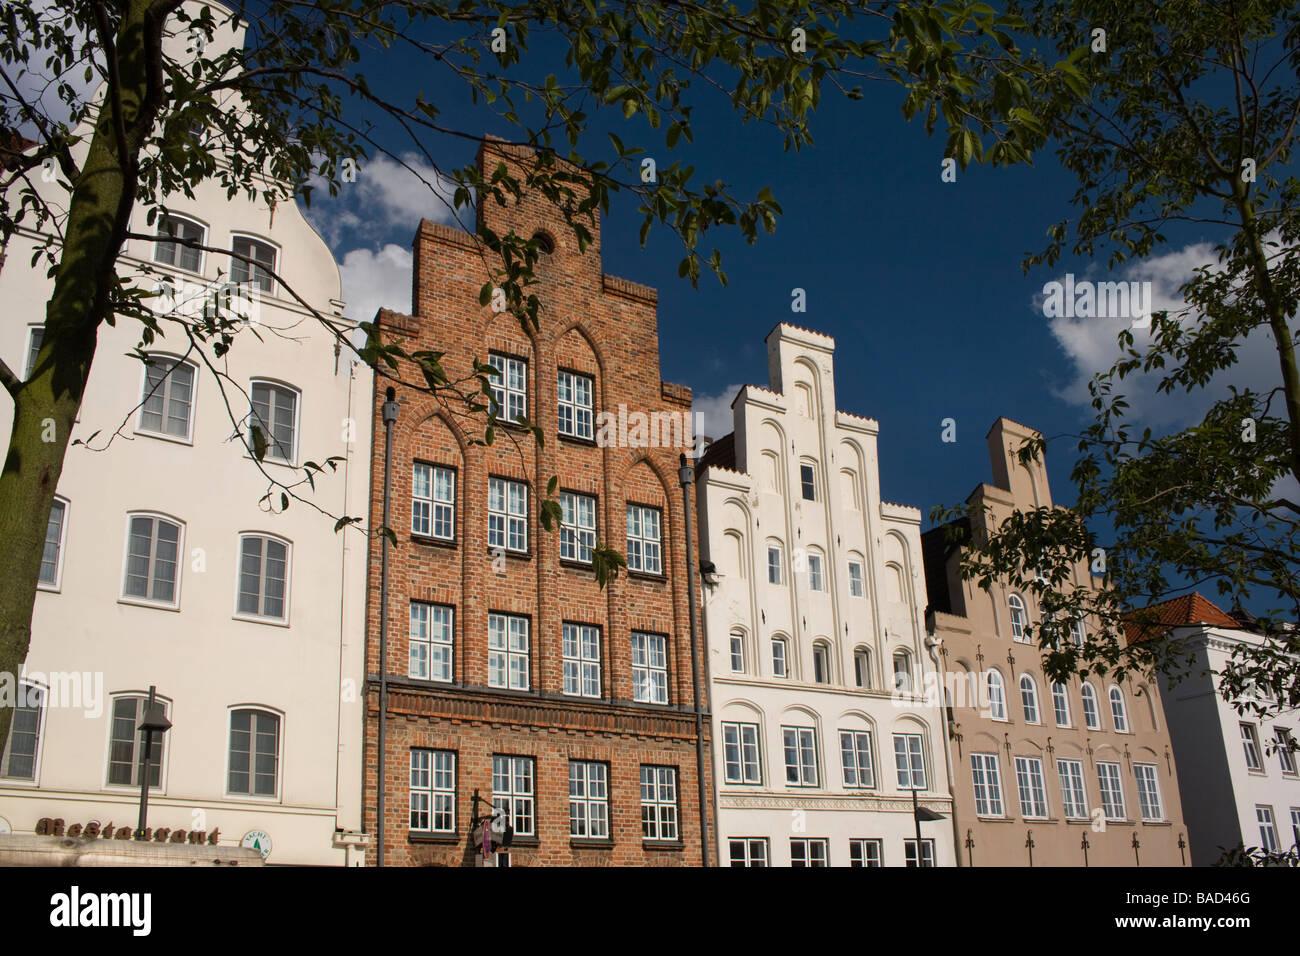 Luebeck town houses facades. Schleswig-Holstein, Germany Stock Photo